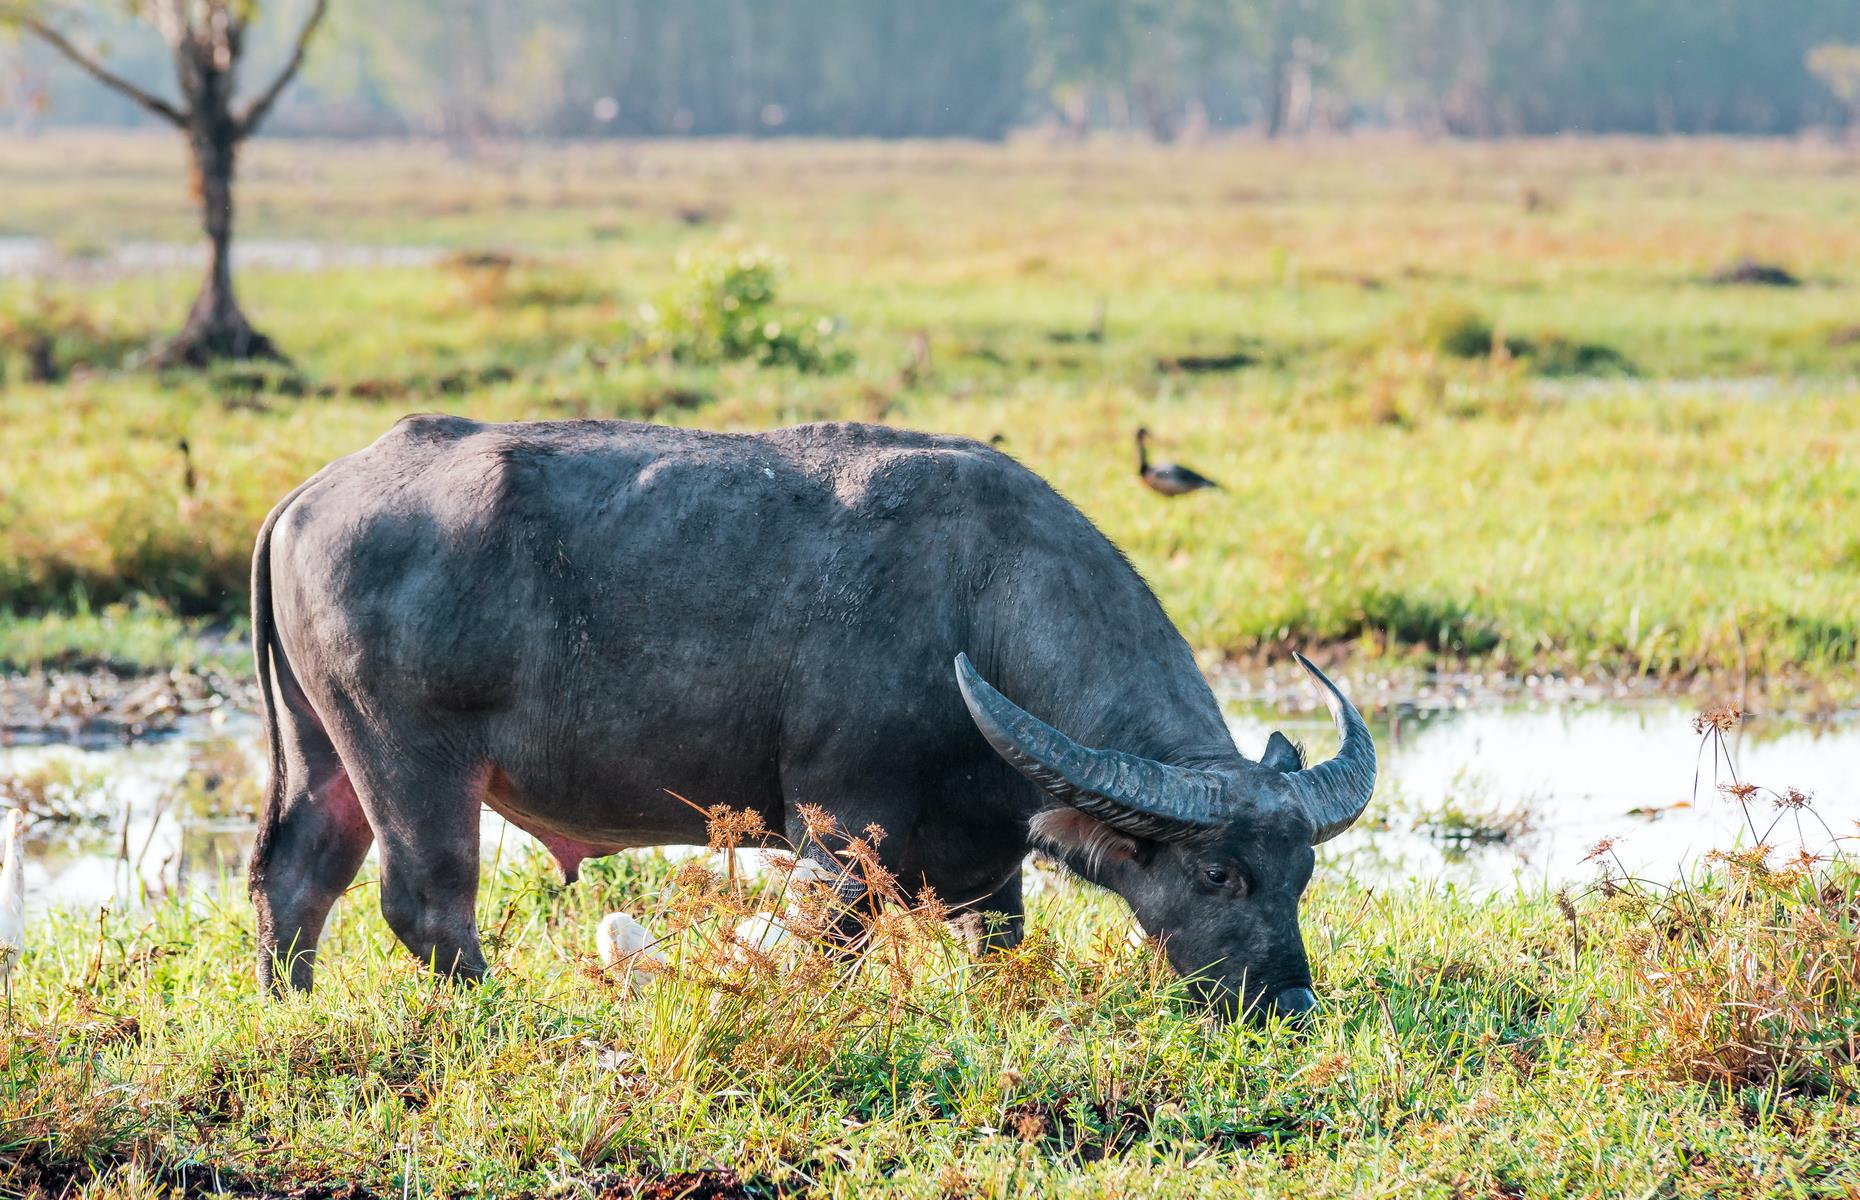 <p>The sight of a water buffalo wallowing in wetlands makes you realize just how similar parts of the lush Top End are to Asia. Buffalo were first introduced to the area in 1825 as working animals and meat for the north’s remote settlements. According to Australia’s environment agency, the settlements and their buffalo were abandoned in 1949 and the feral creatures spread across the floodplains. Today, the mammoth beasts are classified as an invasive species due to the damage they cause to the fragile wetlands.</p>